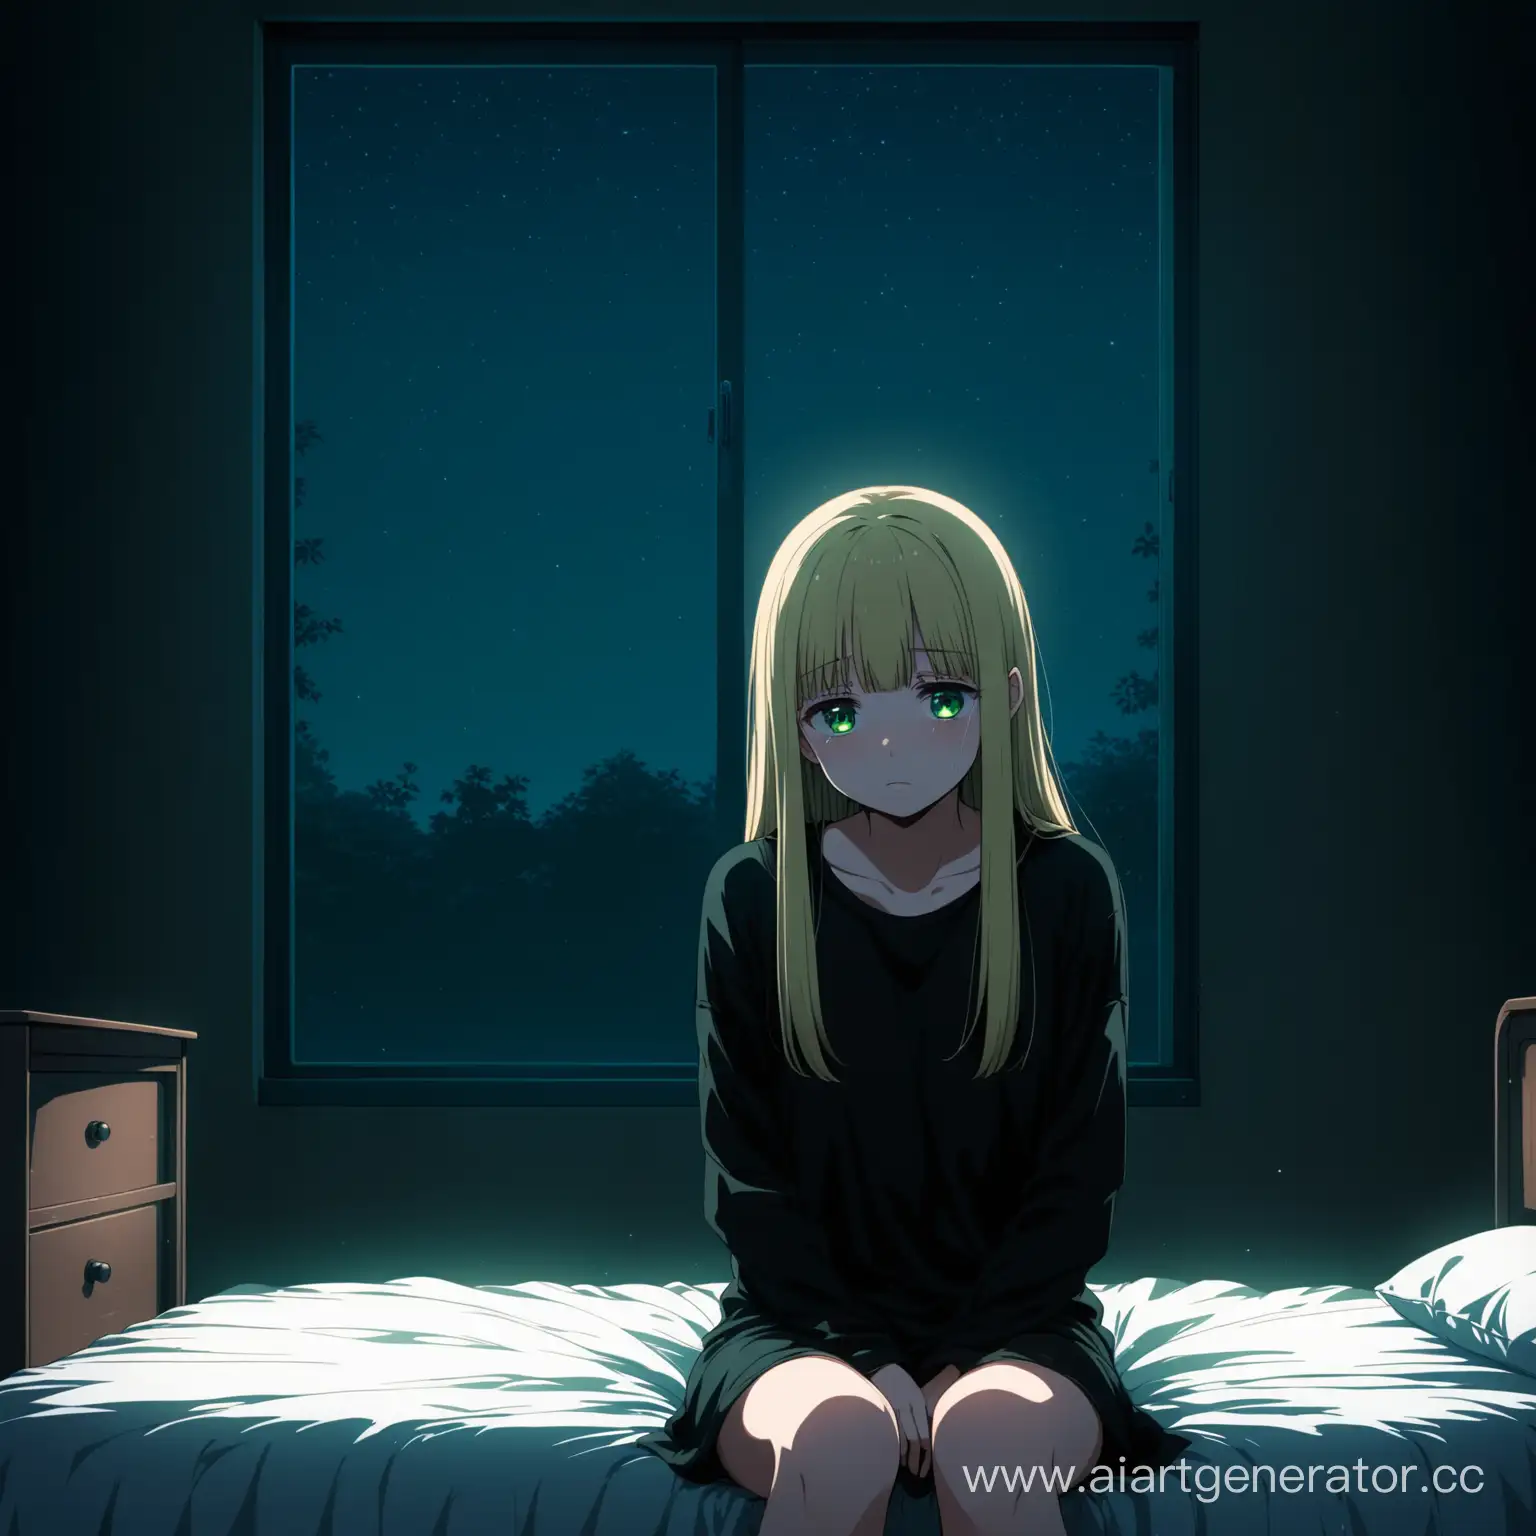 Lonely-Anime-Girl-with-Long-Blonde-Hair-Crying-in-Dimly-Lit-Room